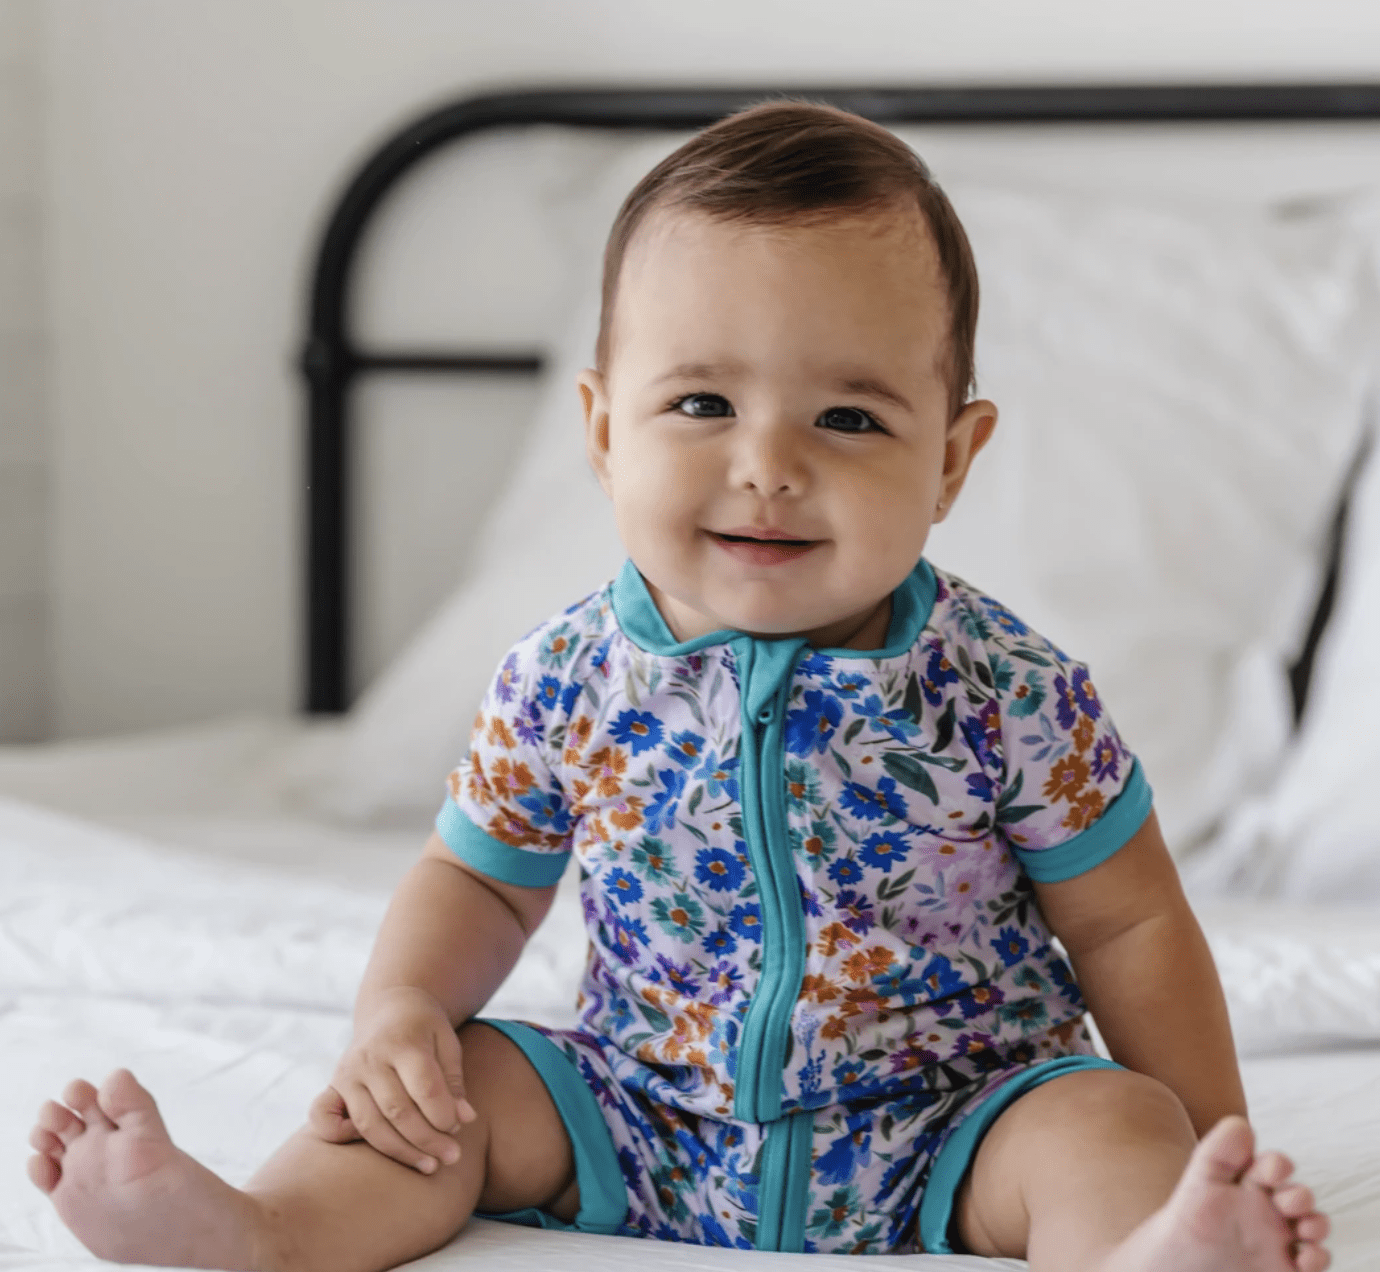 Toddler Baby Boys Bodysuit Short-Sleeve Onesie Use Your Head Print Outfit Summer Pajamas